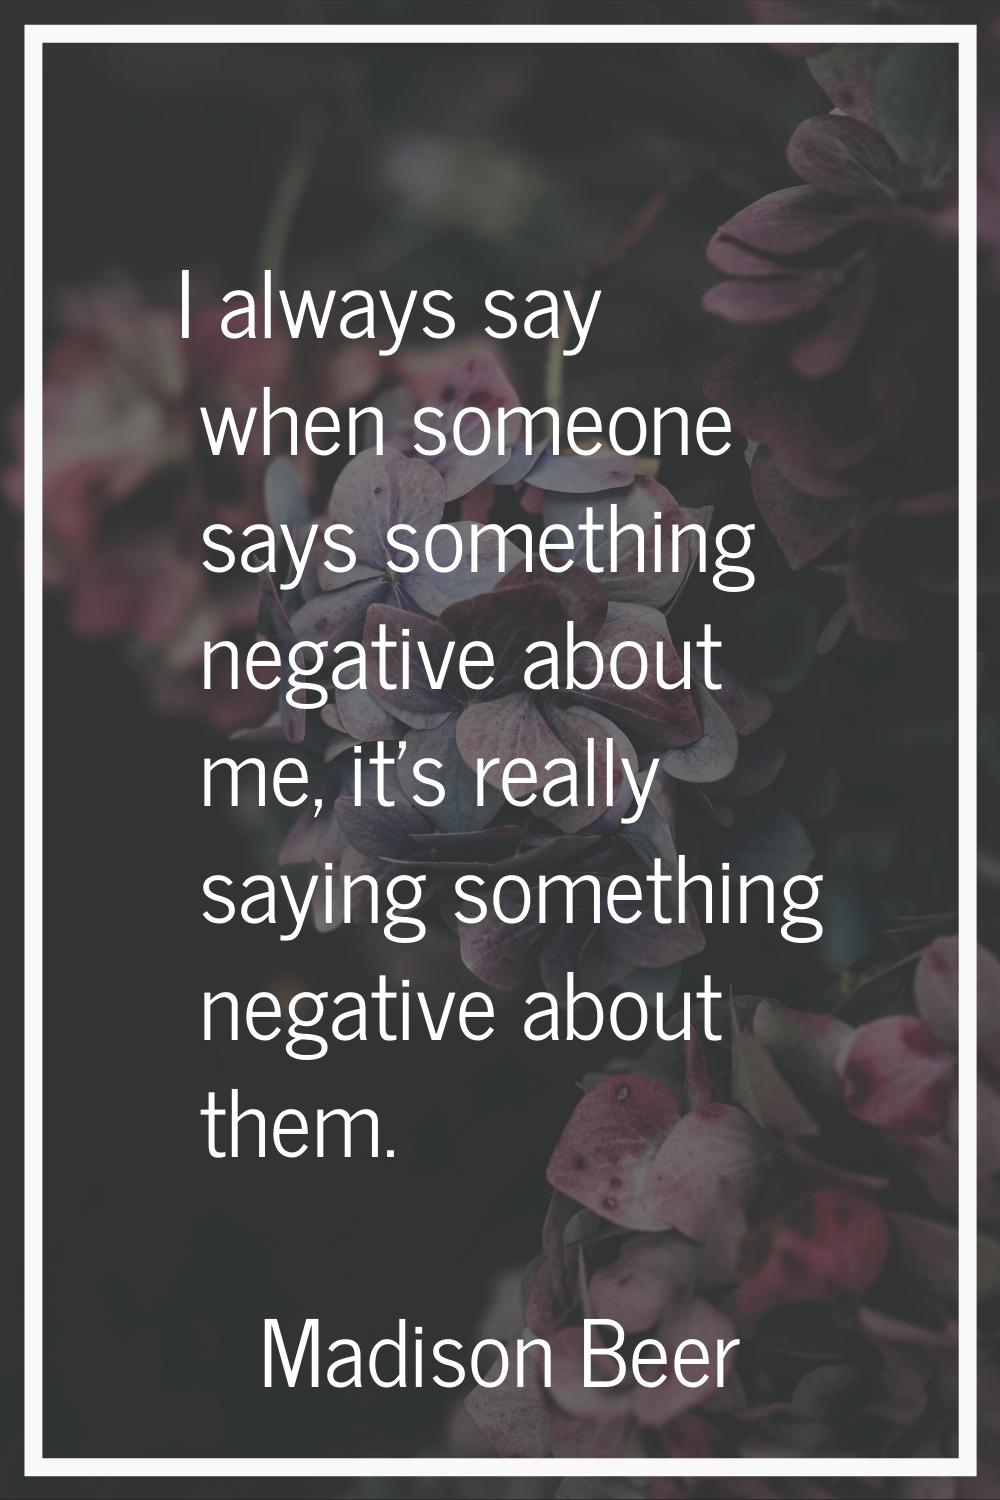 I always say when someone says something negative about me, it's really saying something negative a